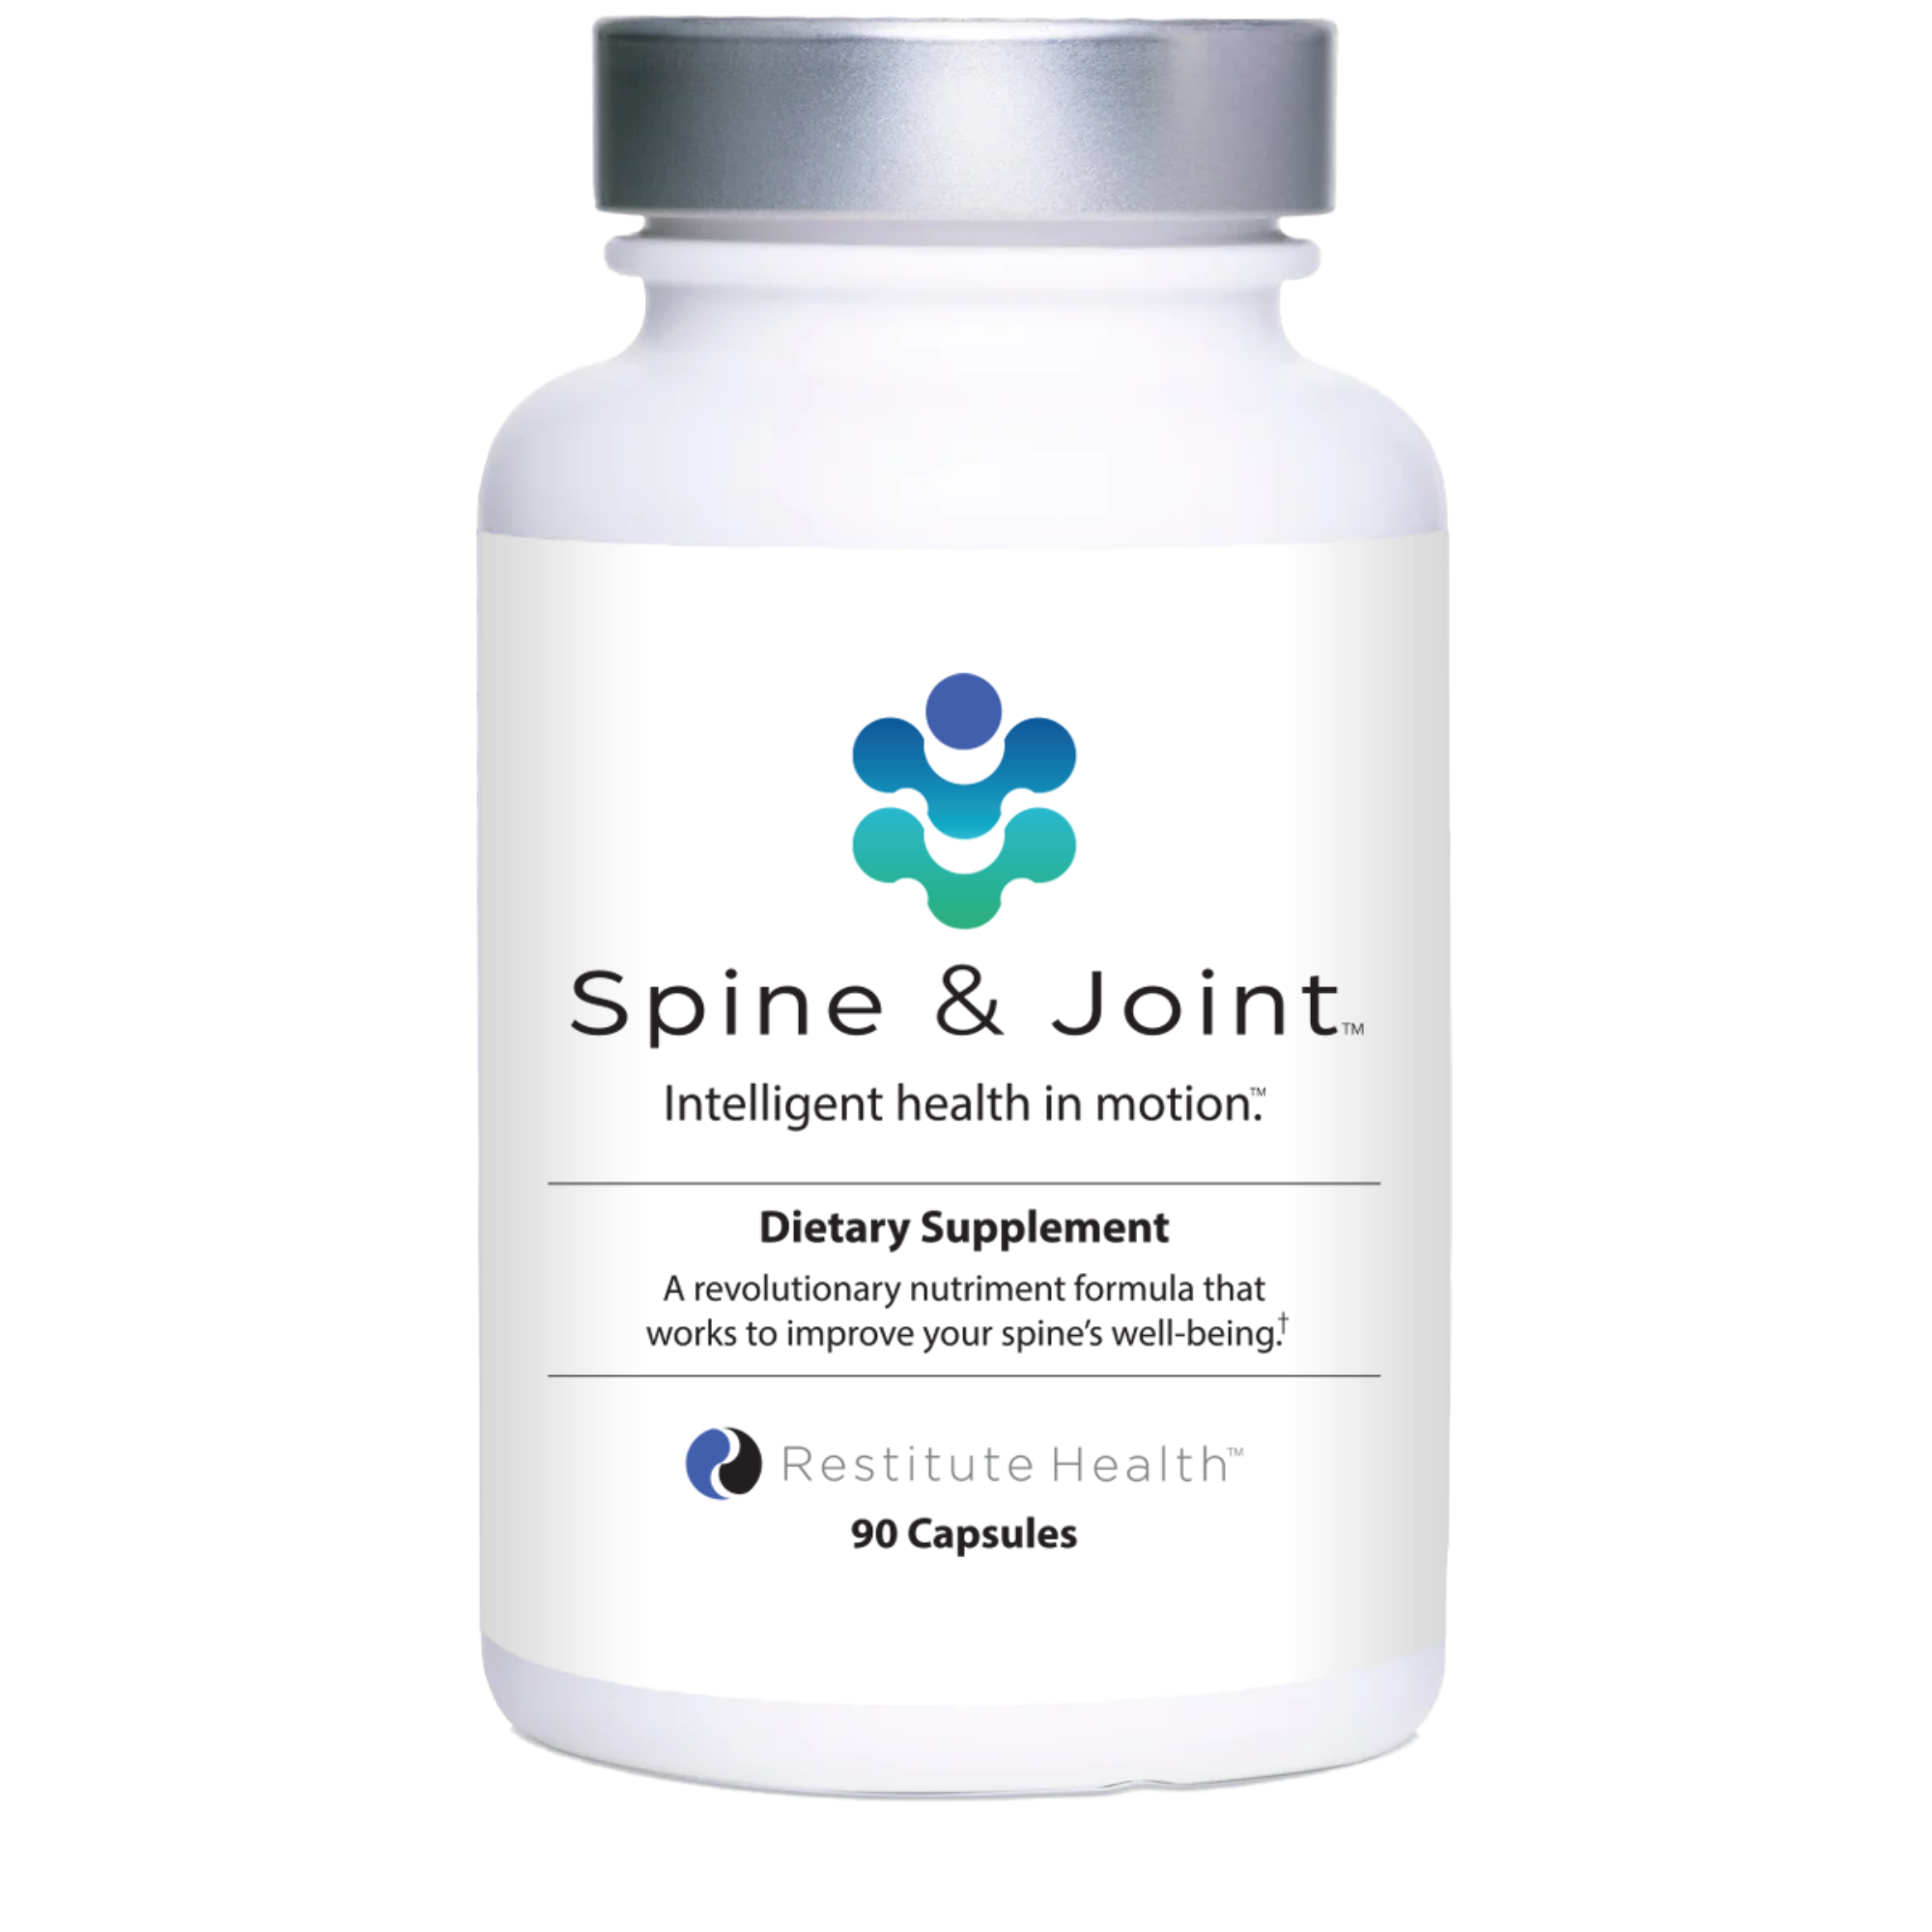 Spine & Joint™